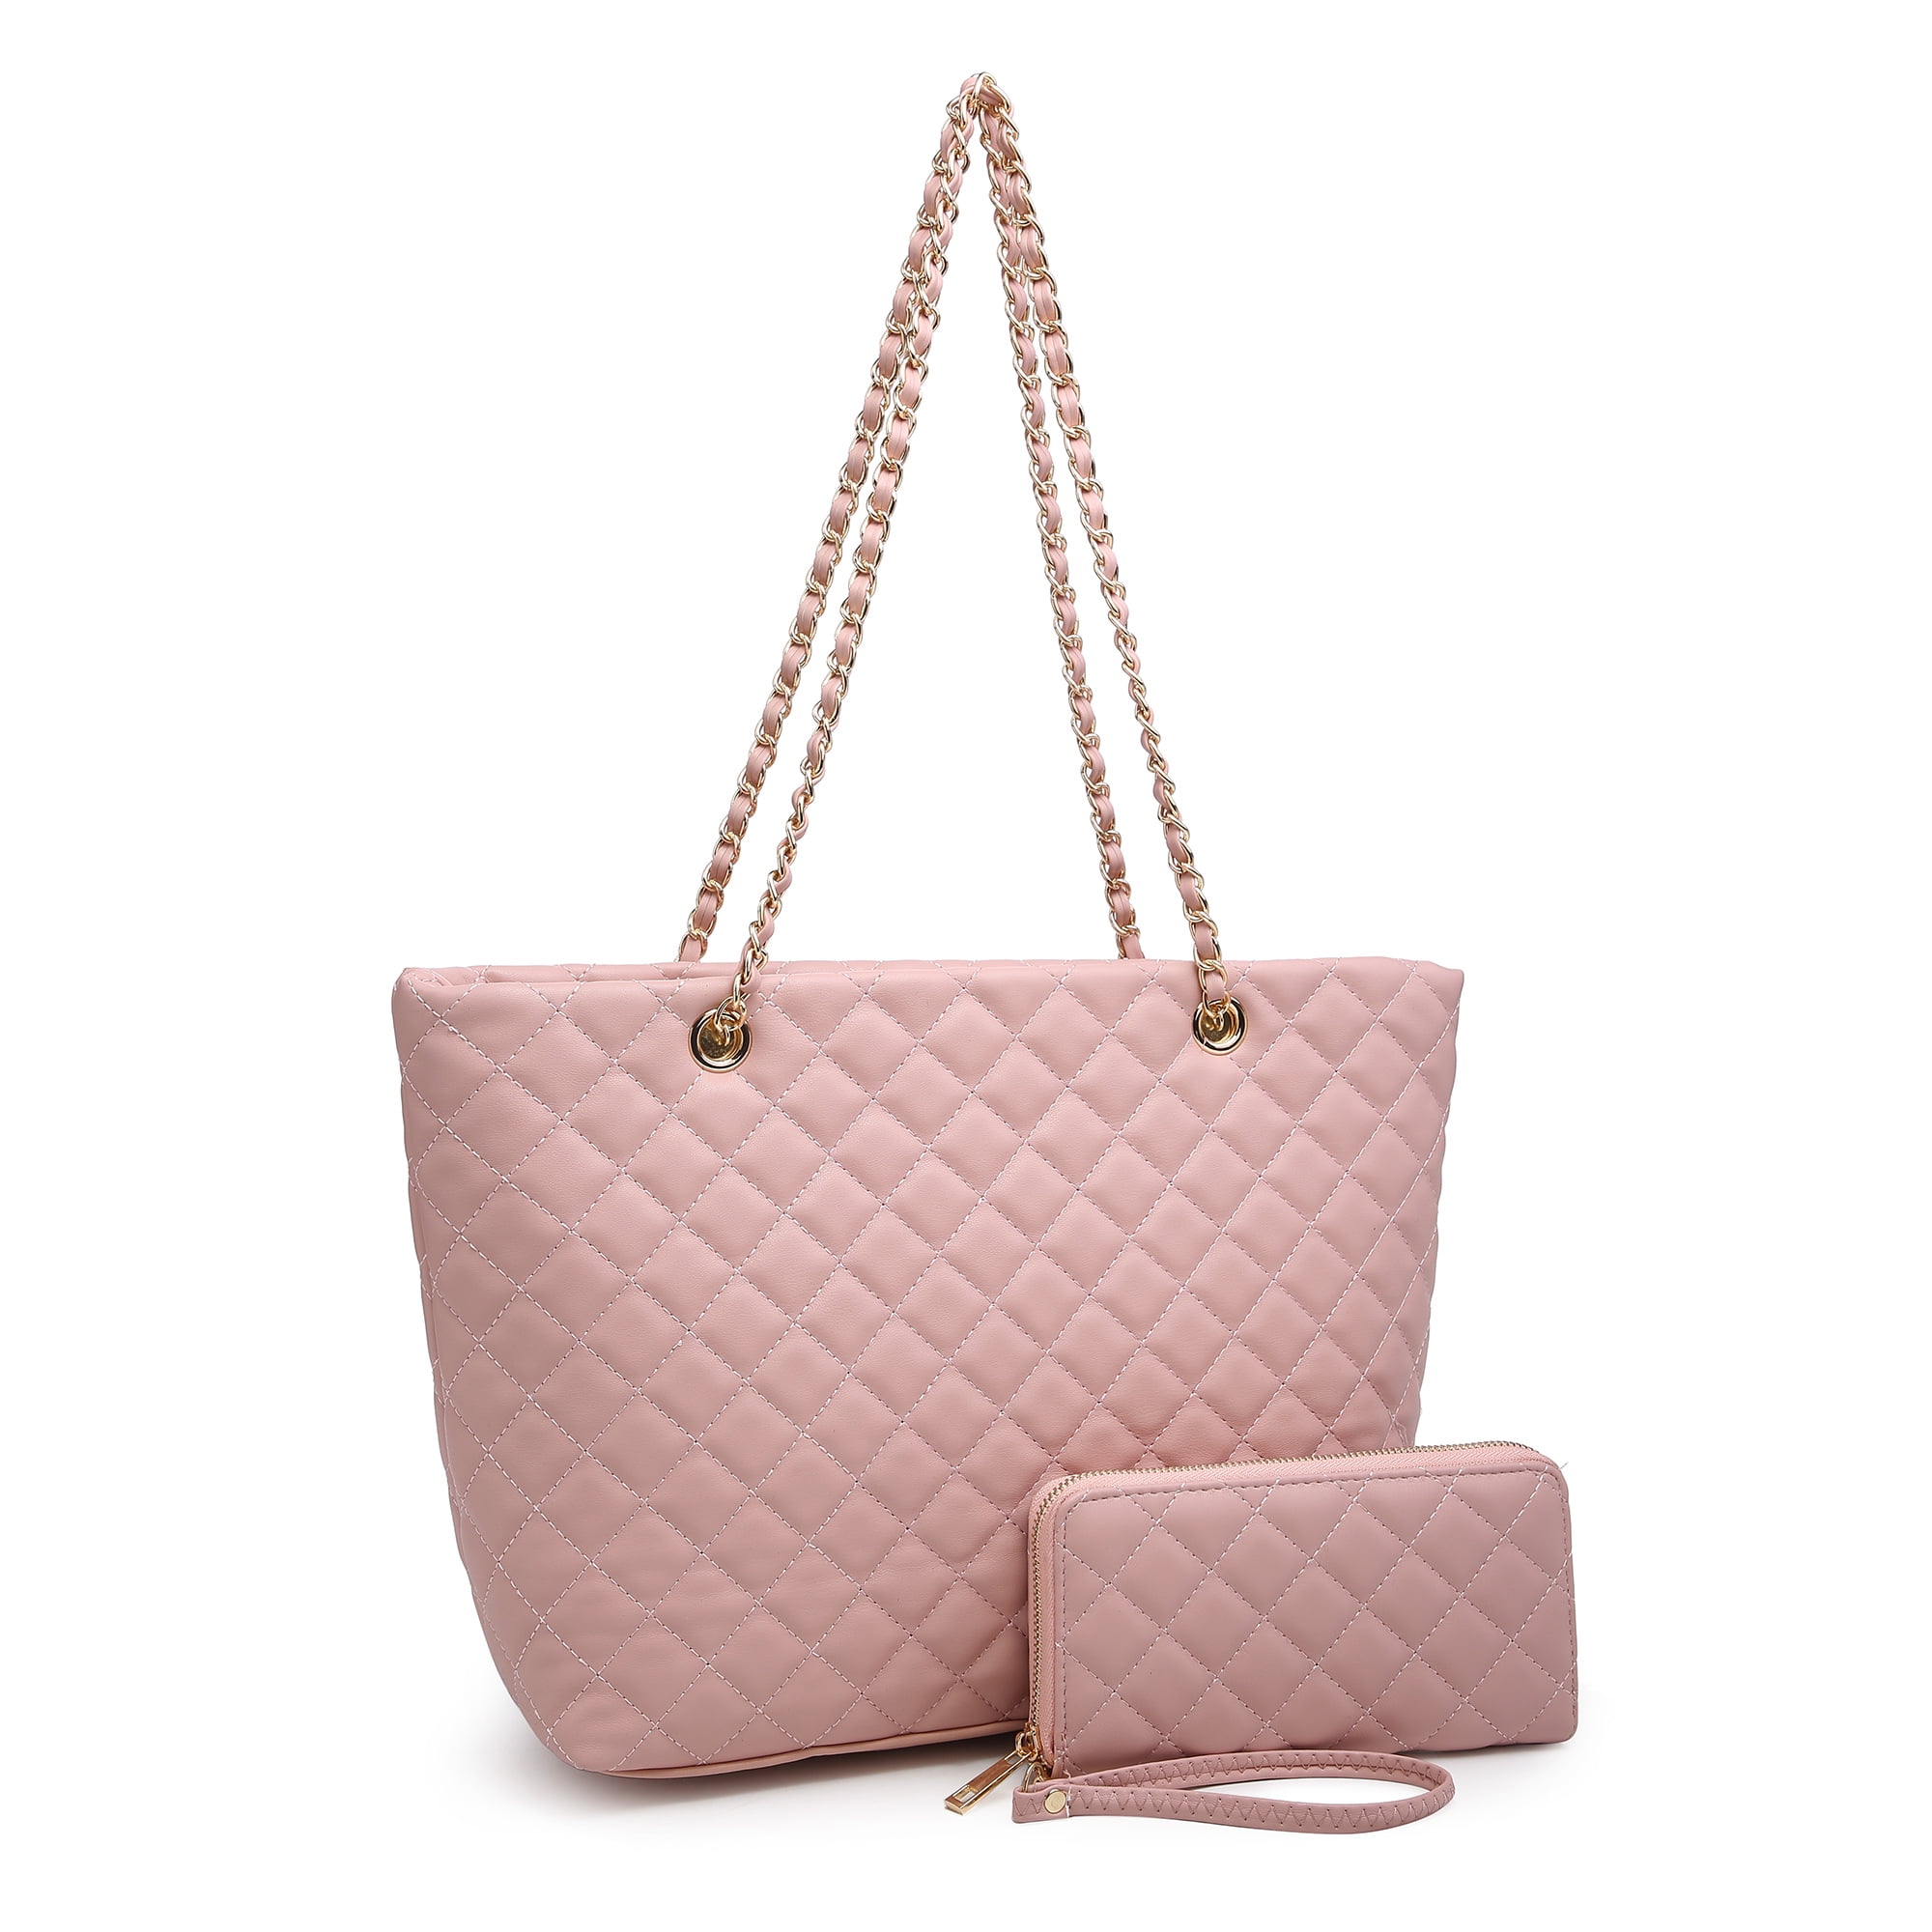 Poppy Womens Quilted Crossbody Bag Handbags Vegan Leather Purses for Women Shoulder Bag with Chain Strap, Women's, Size: One size, Pink